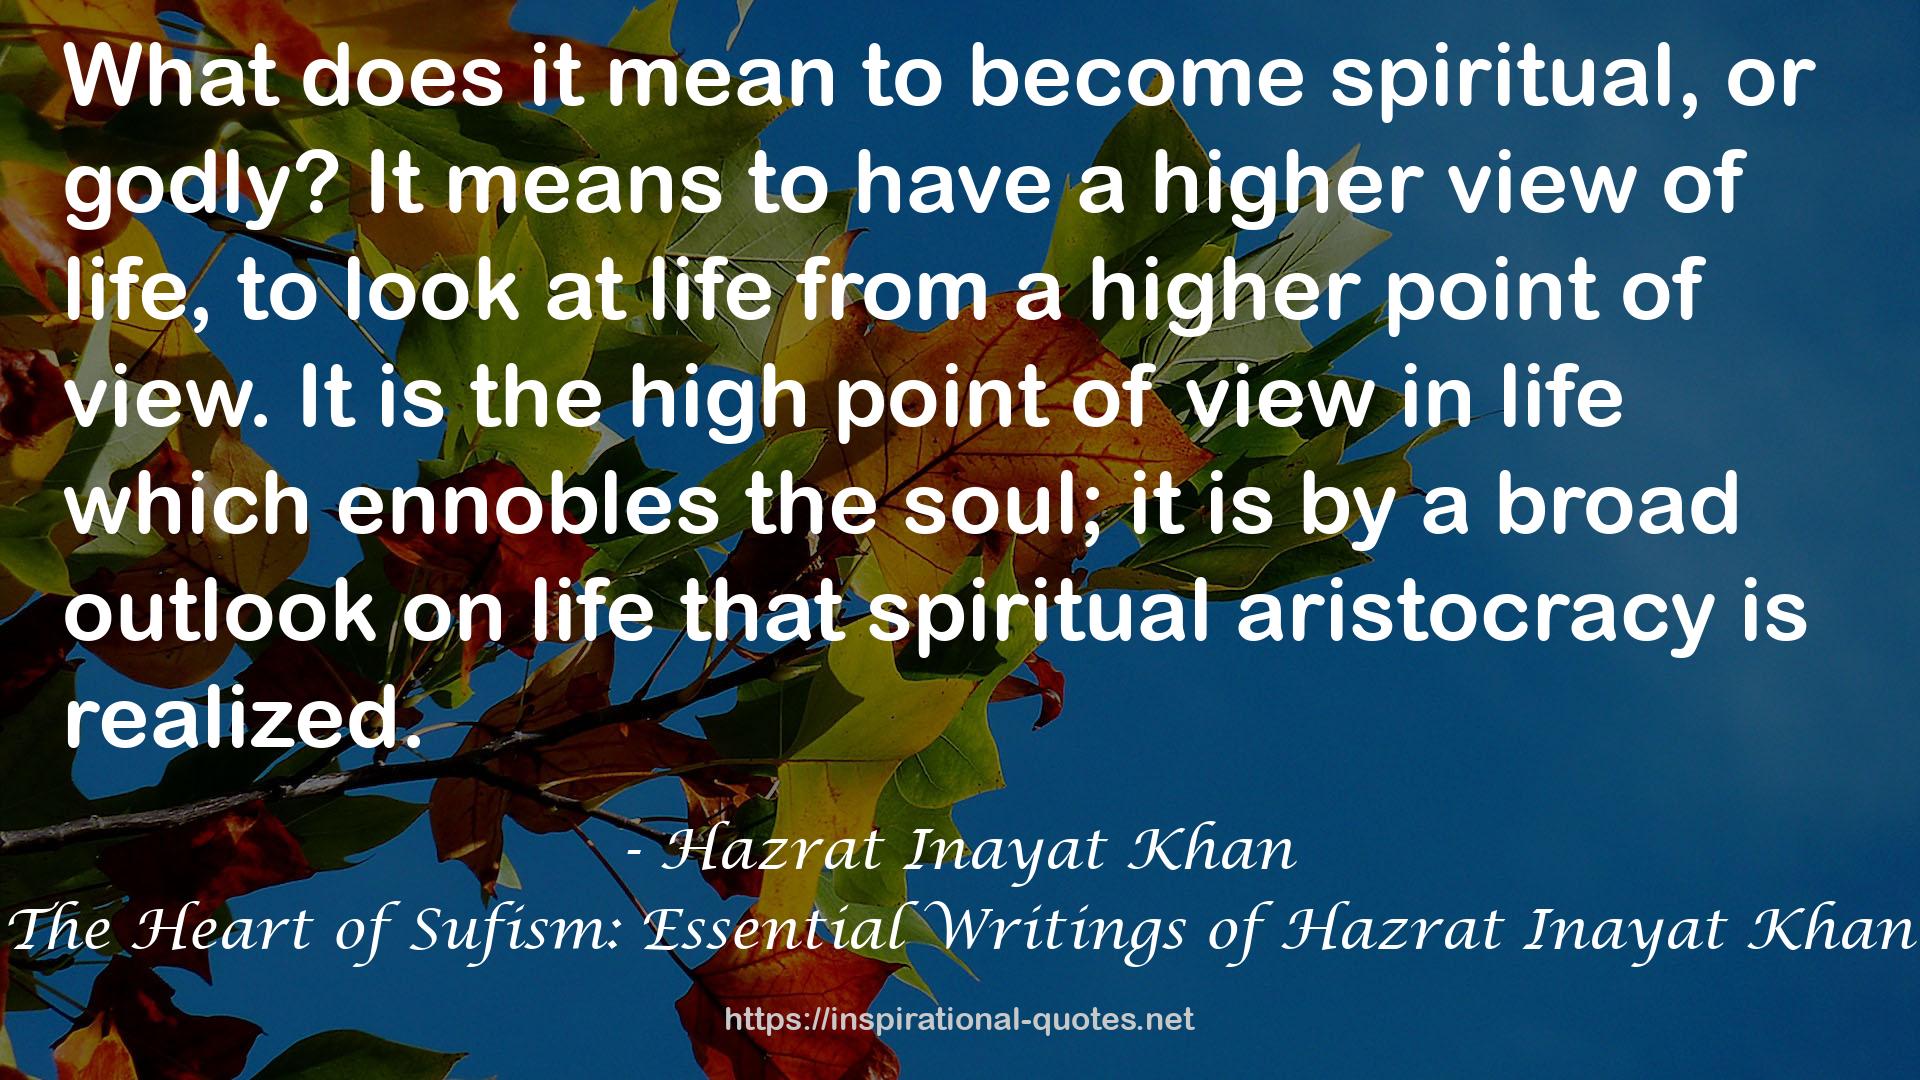 The Heart of Sufism: Essential Writings of Hazrat Inayat Khan QUOTES